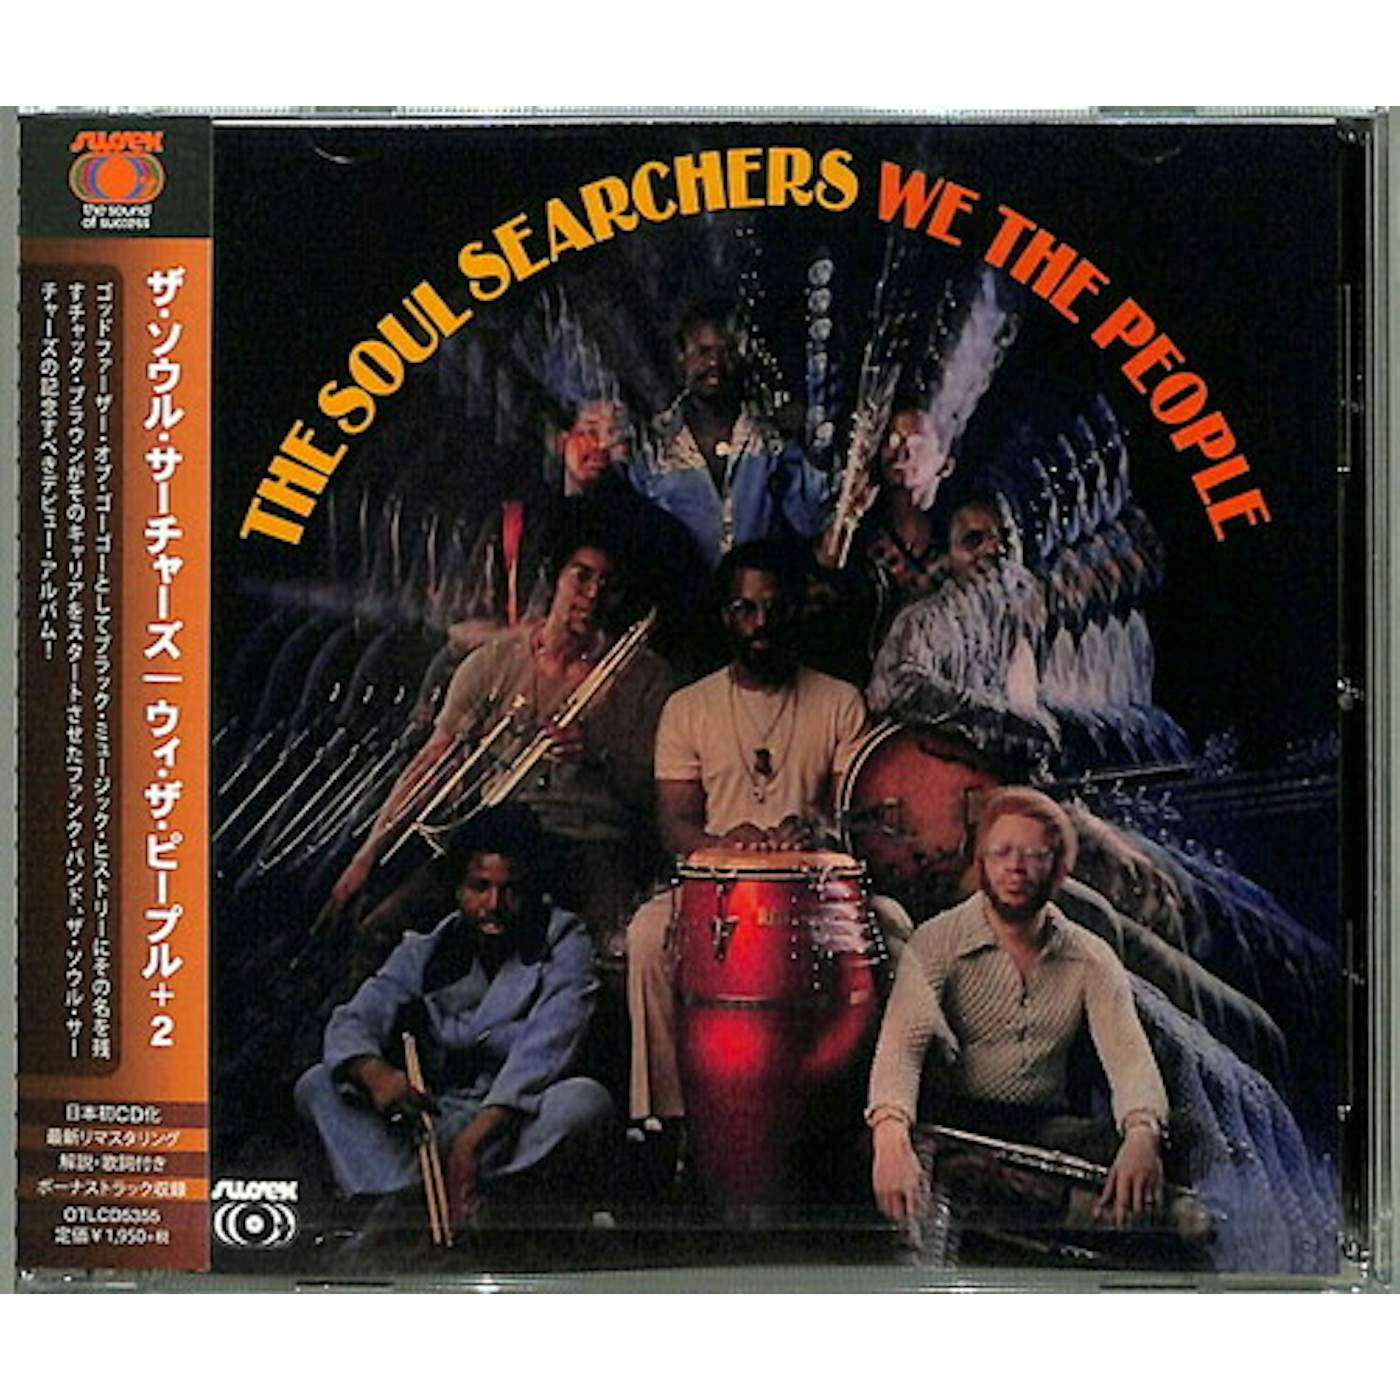 The Soul Searchers WE THE PEOPLE CD